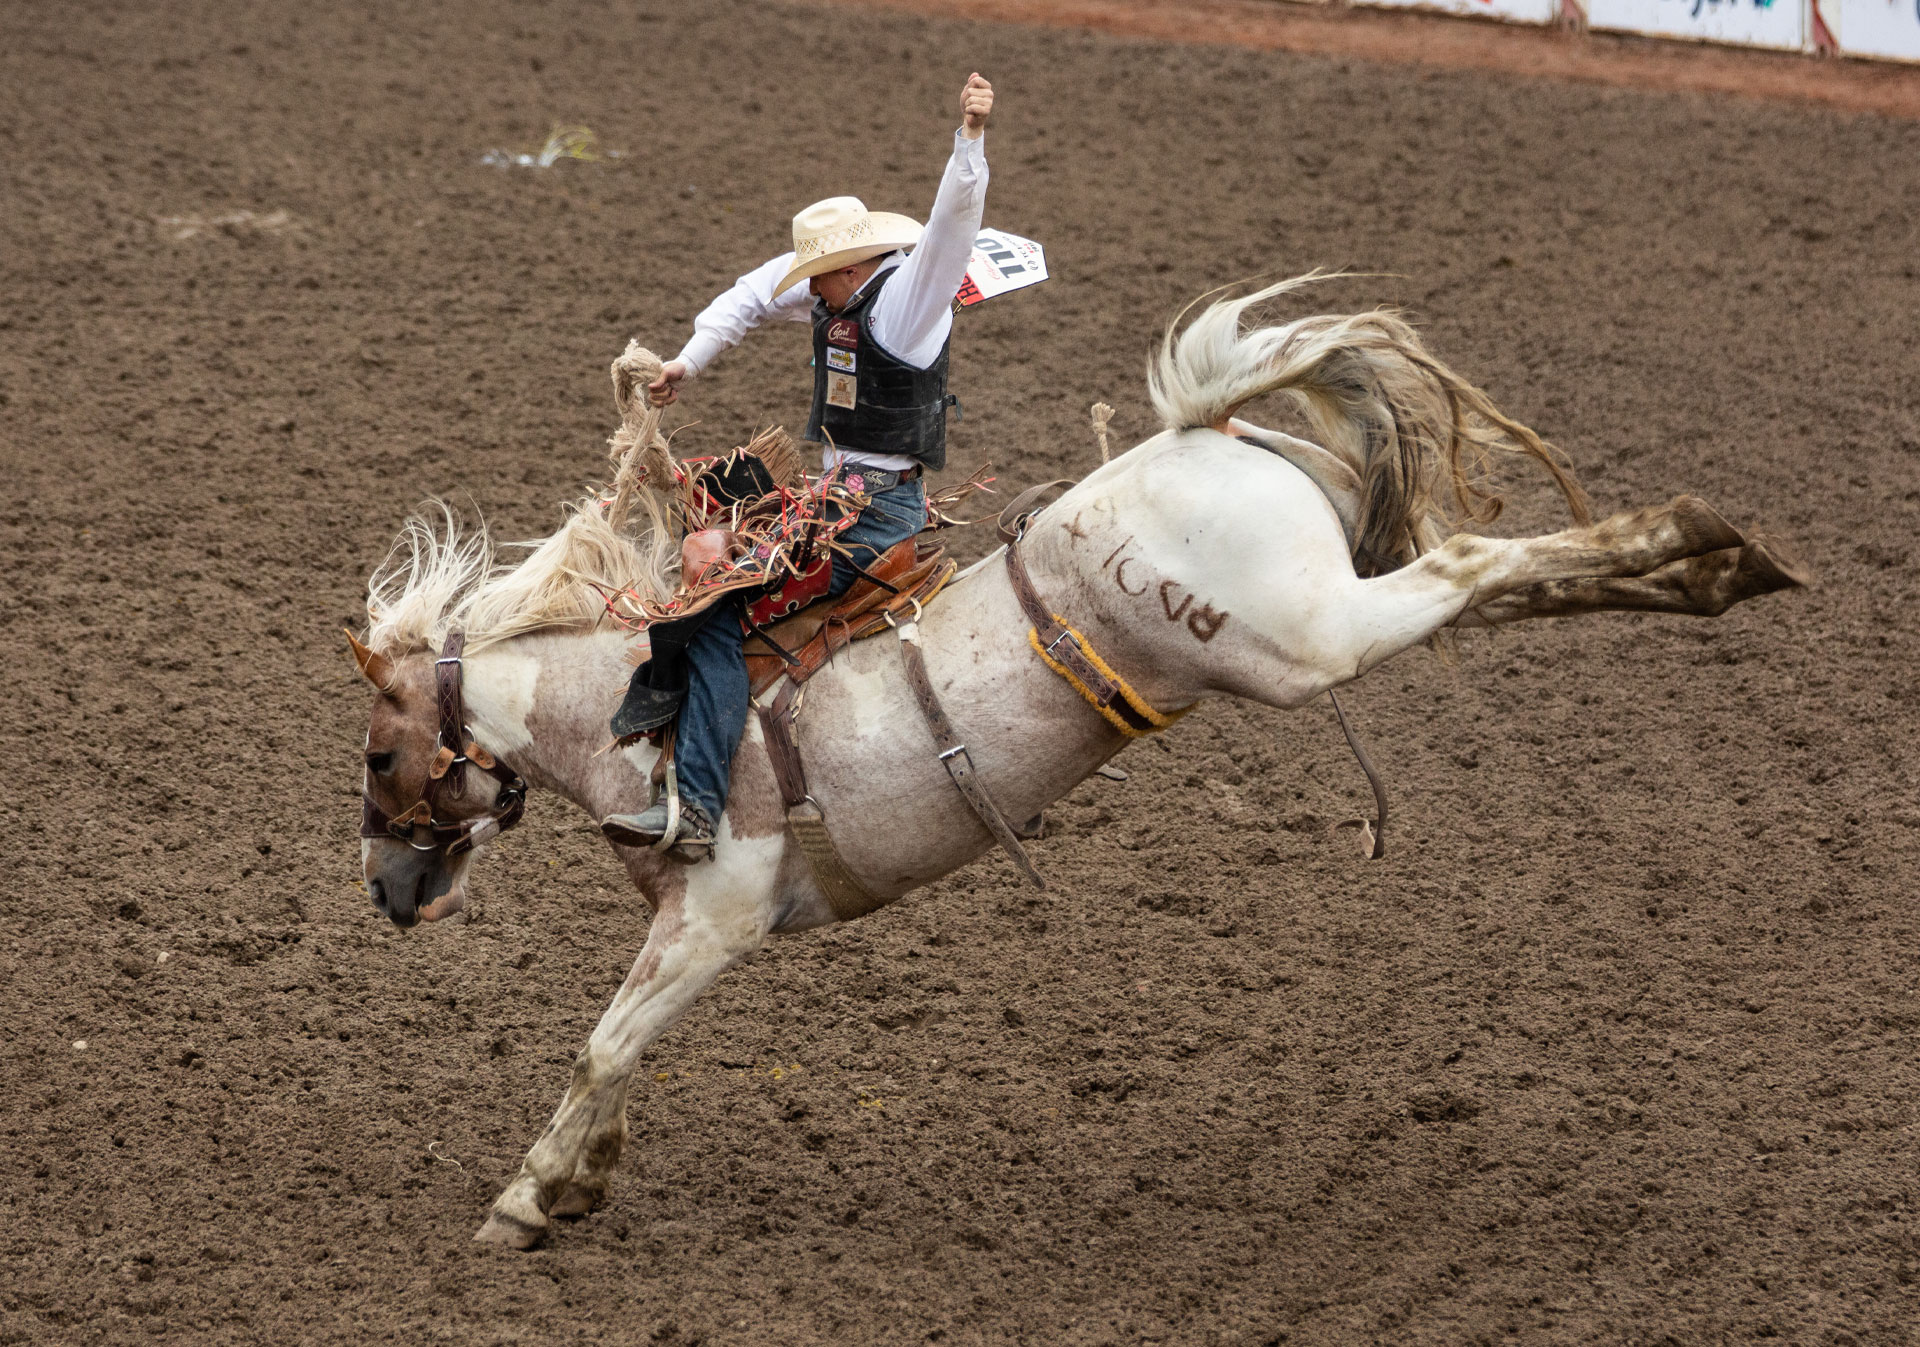 Rodeo at the Calgary Stampede (Photo credit: Shaun Robinson/Calgary Stampede).